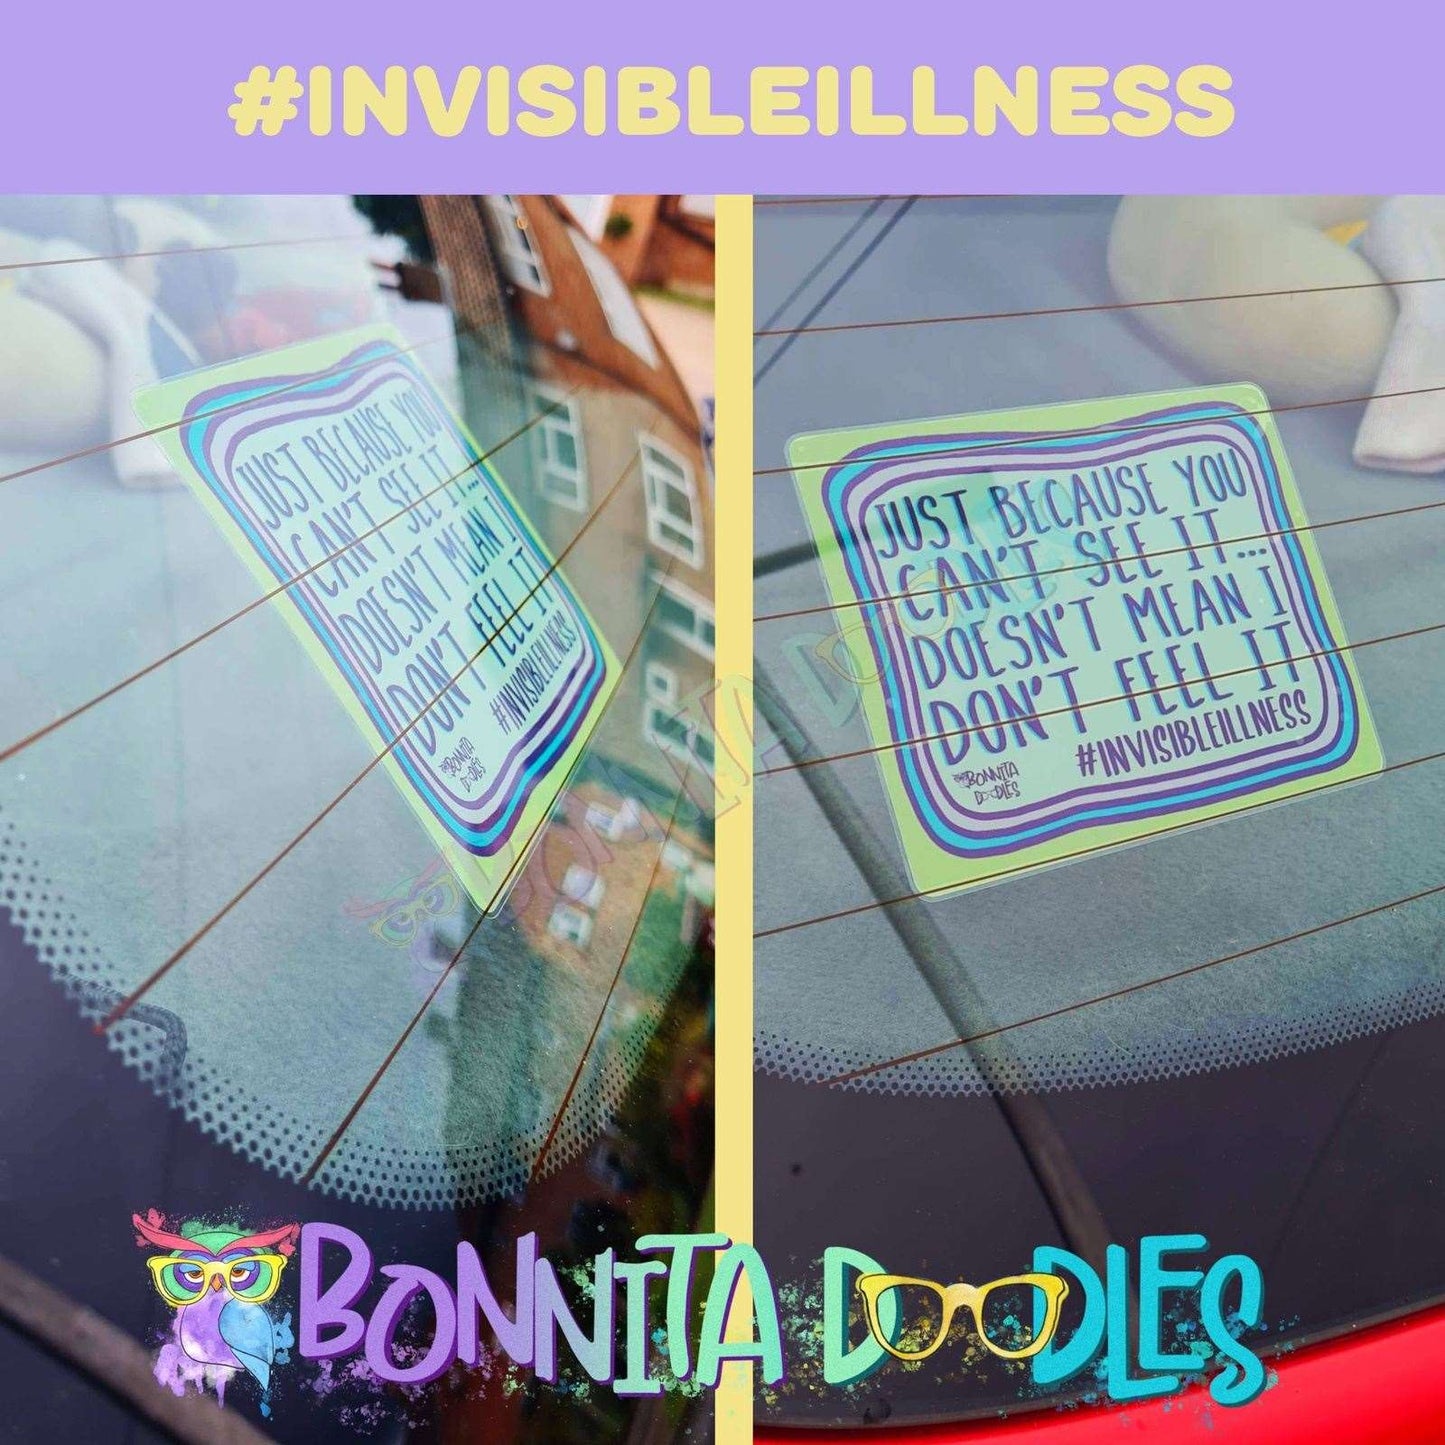 Invisible disability removable window cling